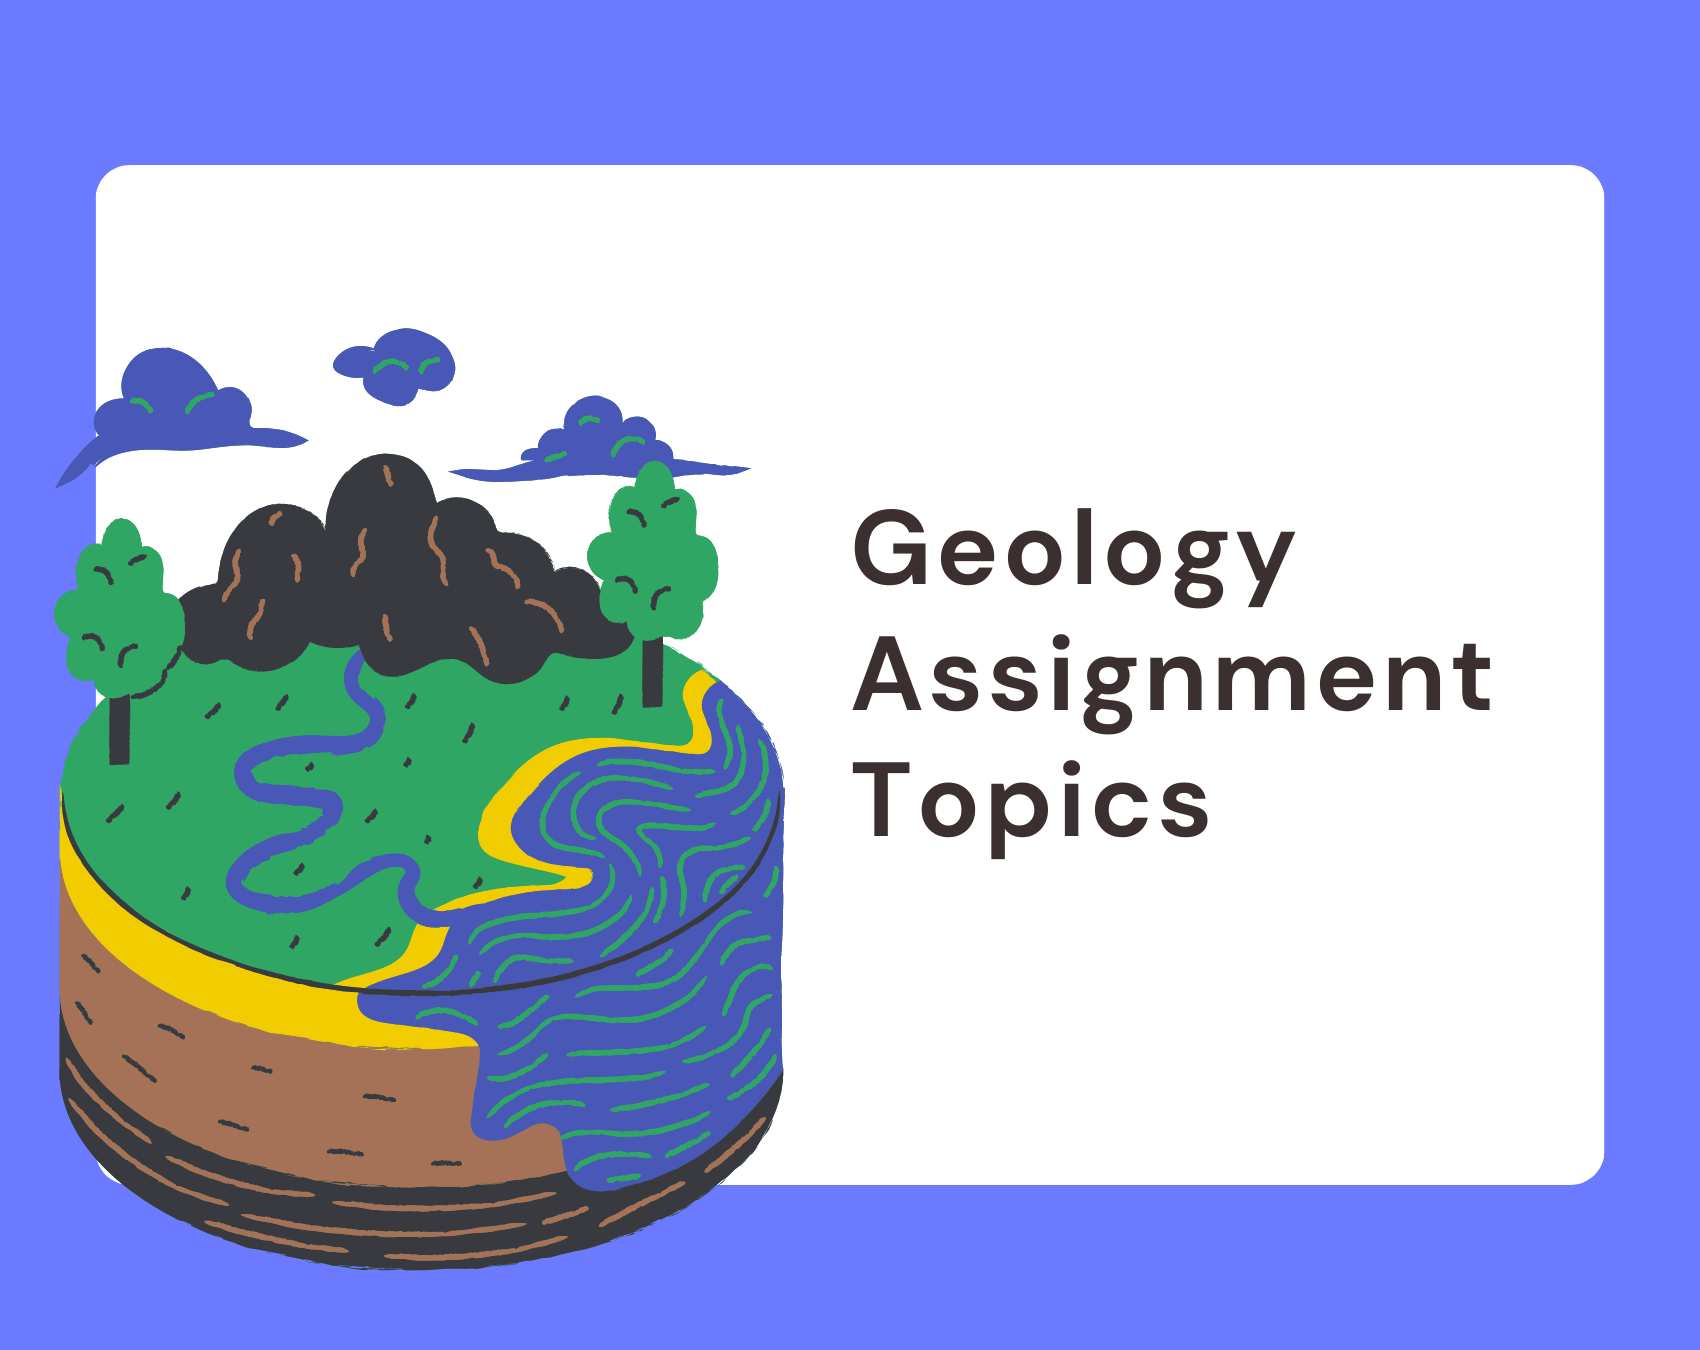 Geology Assignment Topics